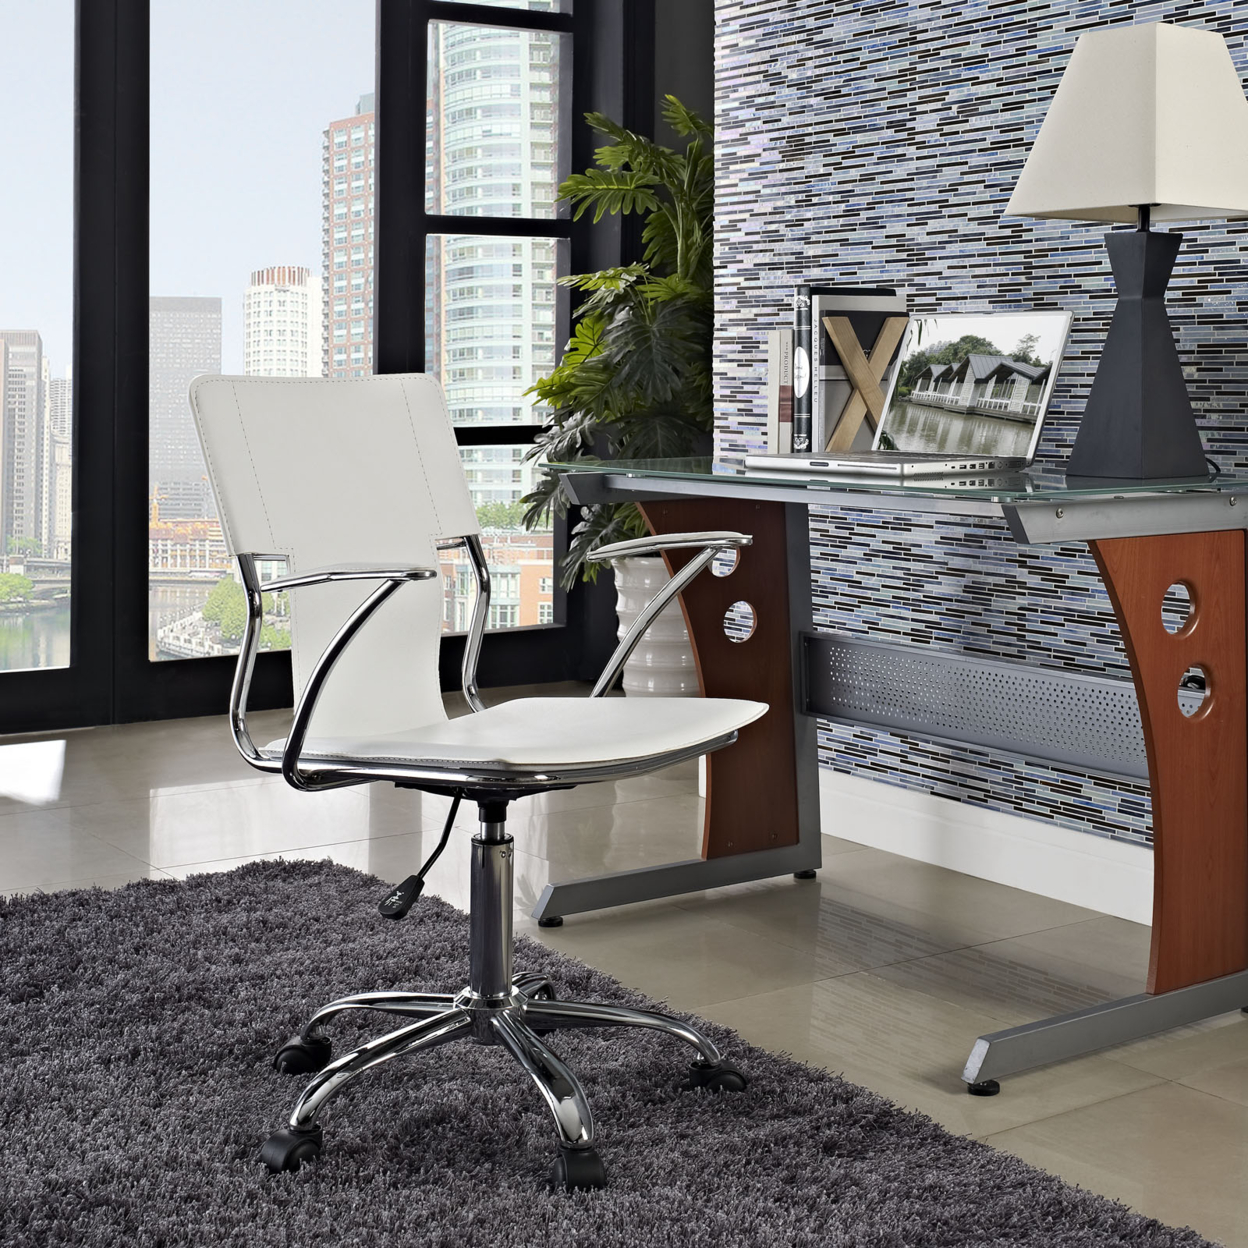 White Studio Office Chair - image 1 of 5